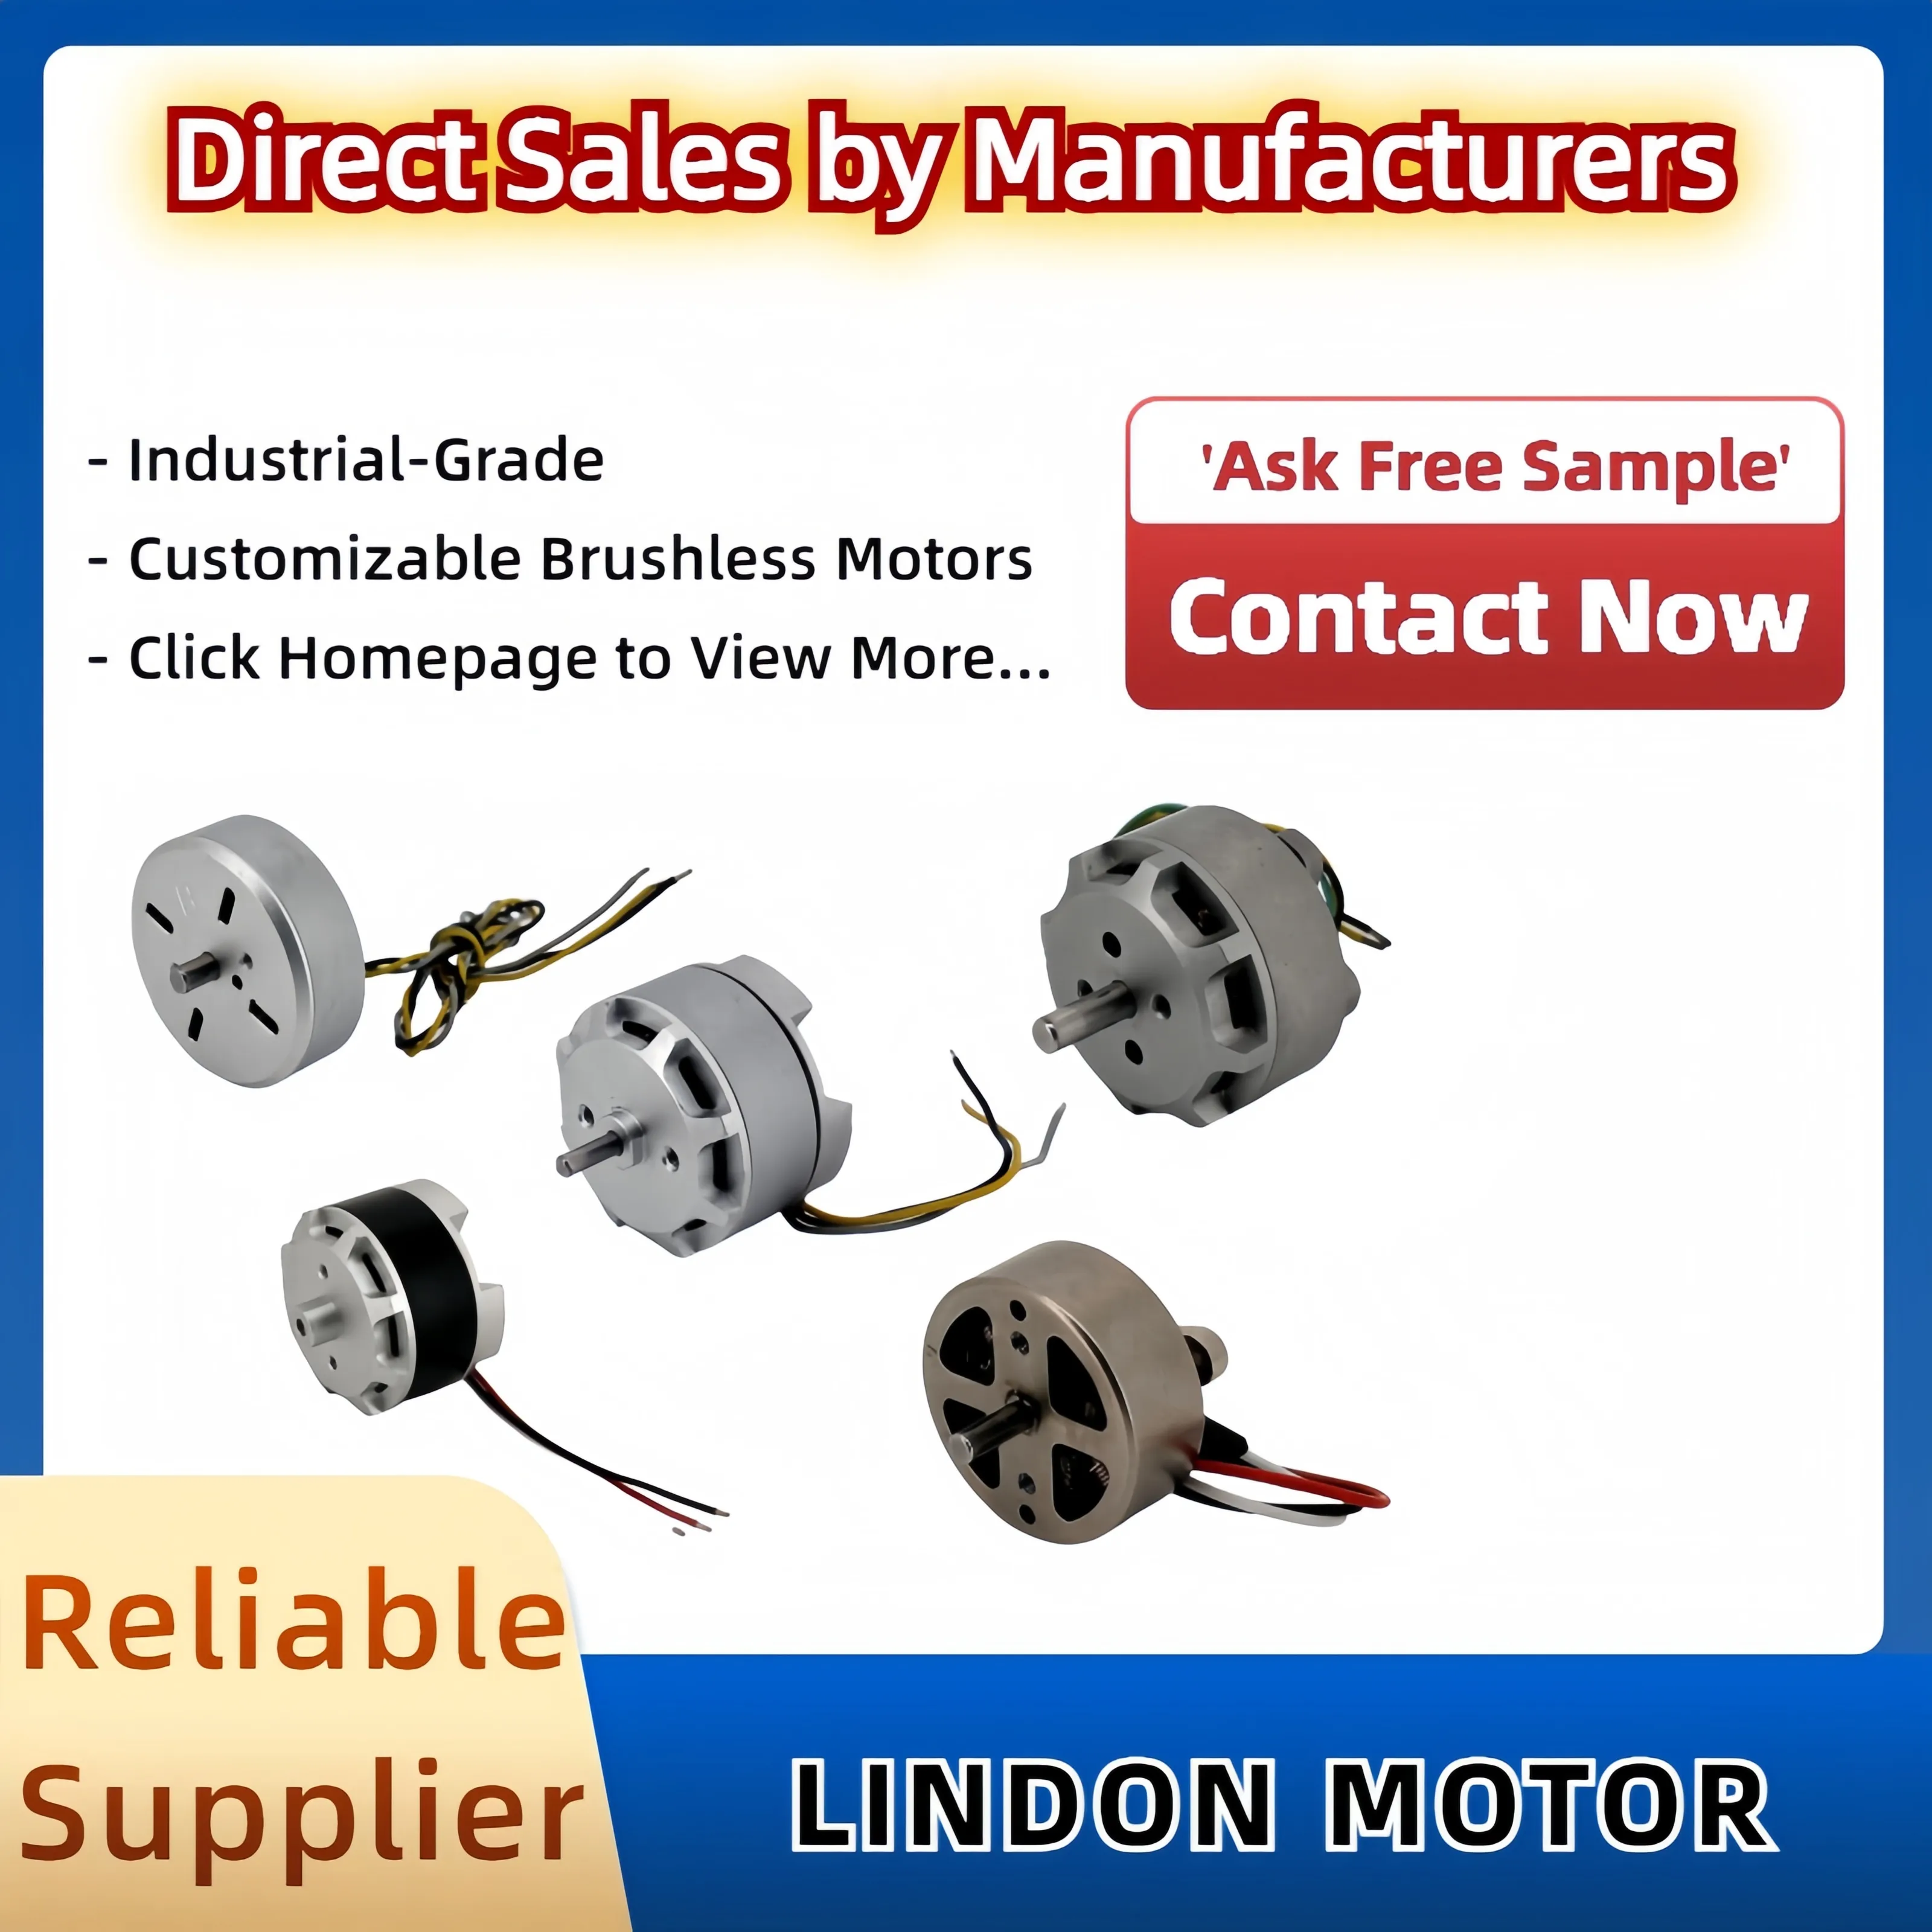 High Efficiency Low Maintenance Long-lasting Brushless Motor 5.5V 2.5W with 16916RPM CW/CCW BLDC Motors